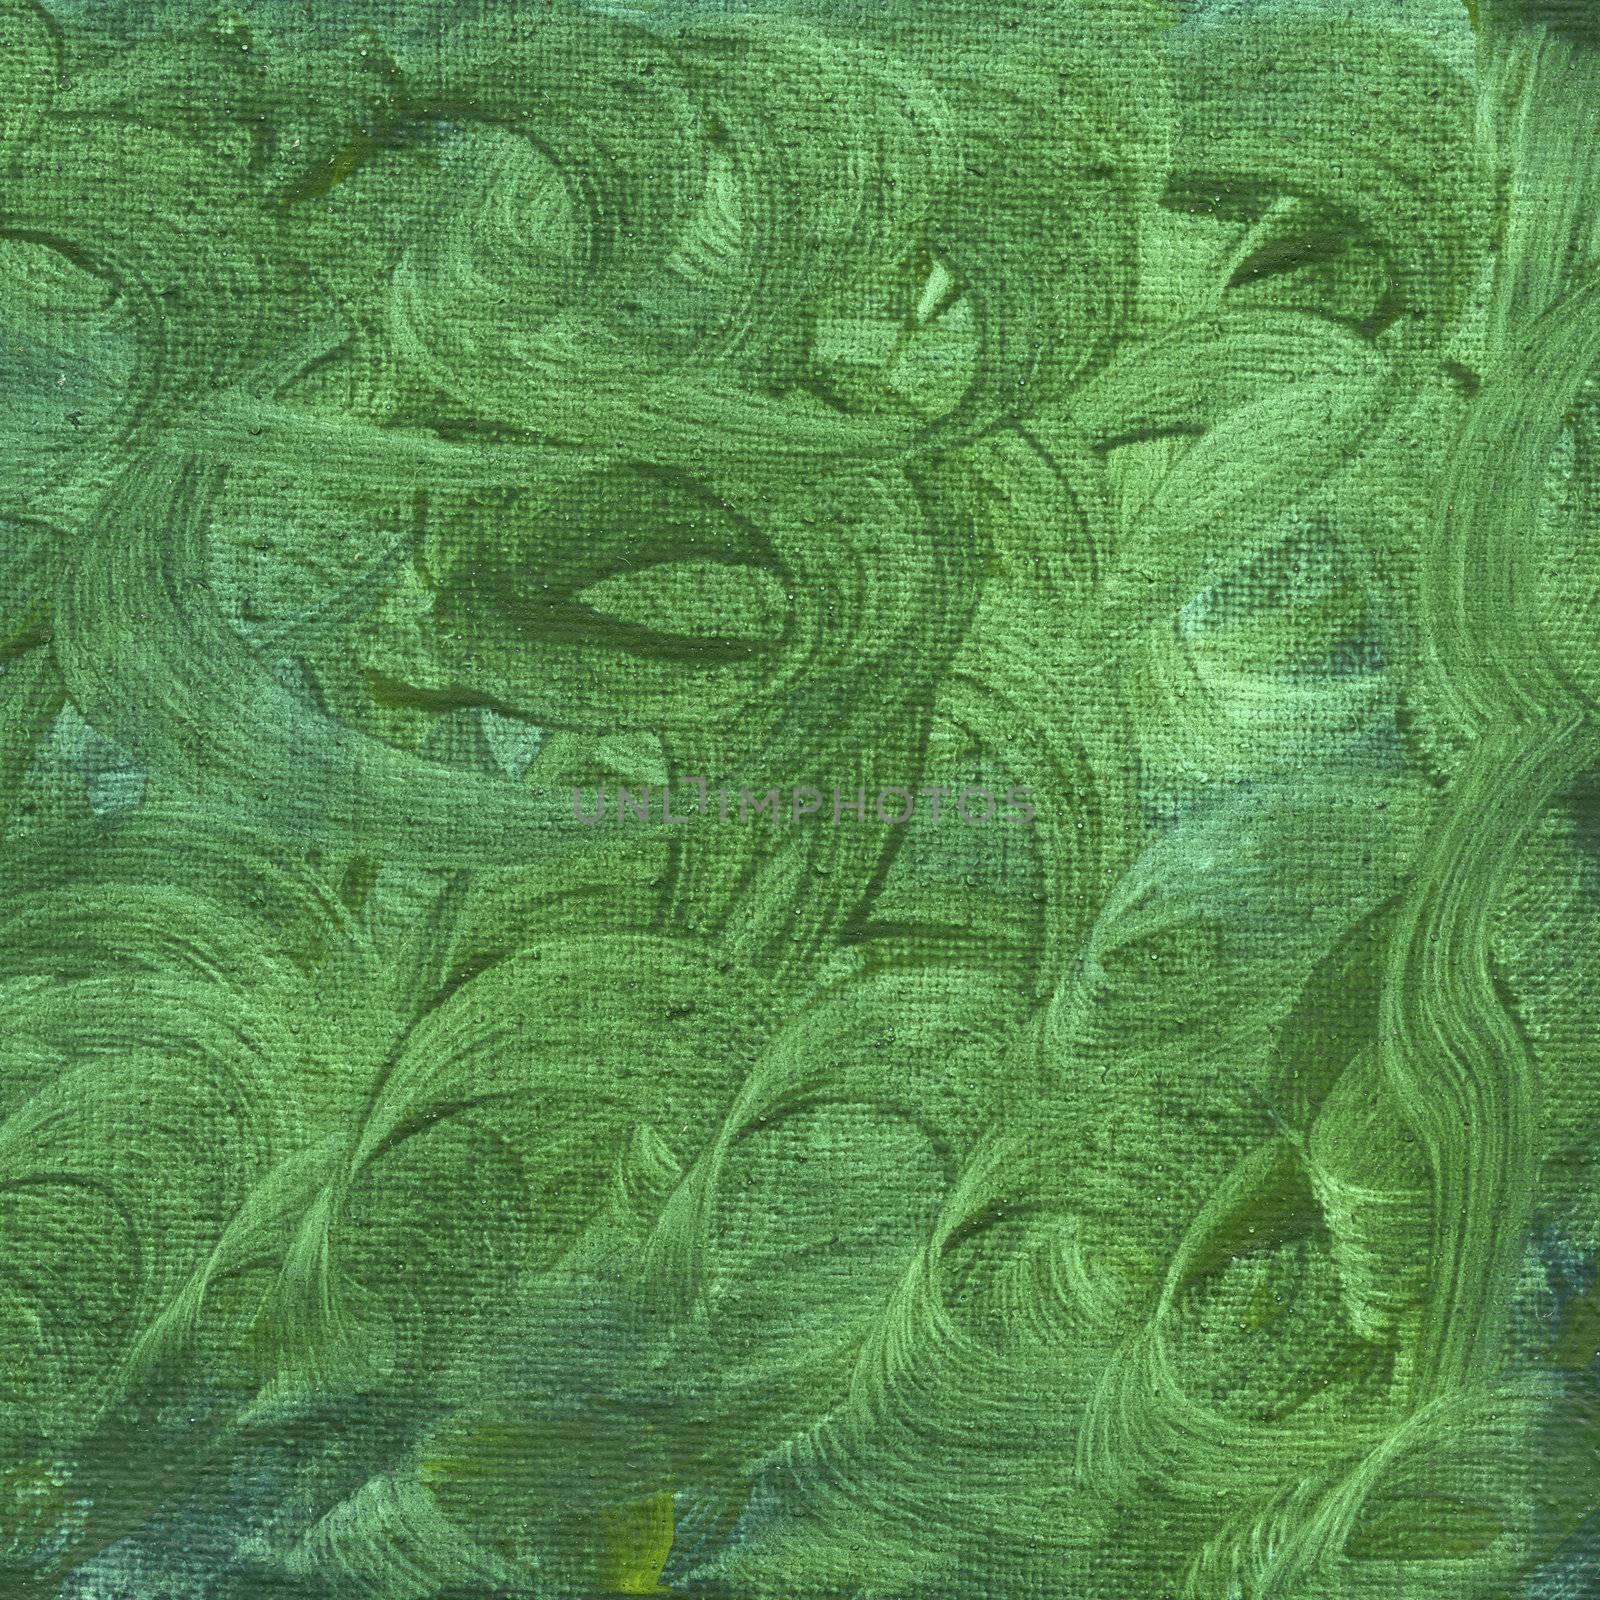 green watercolor abstract with canvas texture by PixelsAway